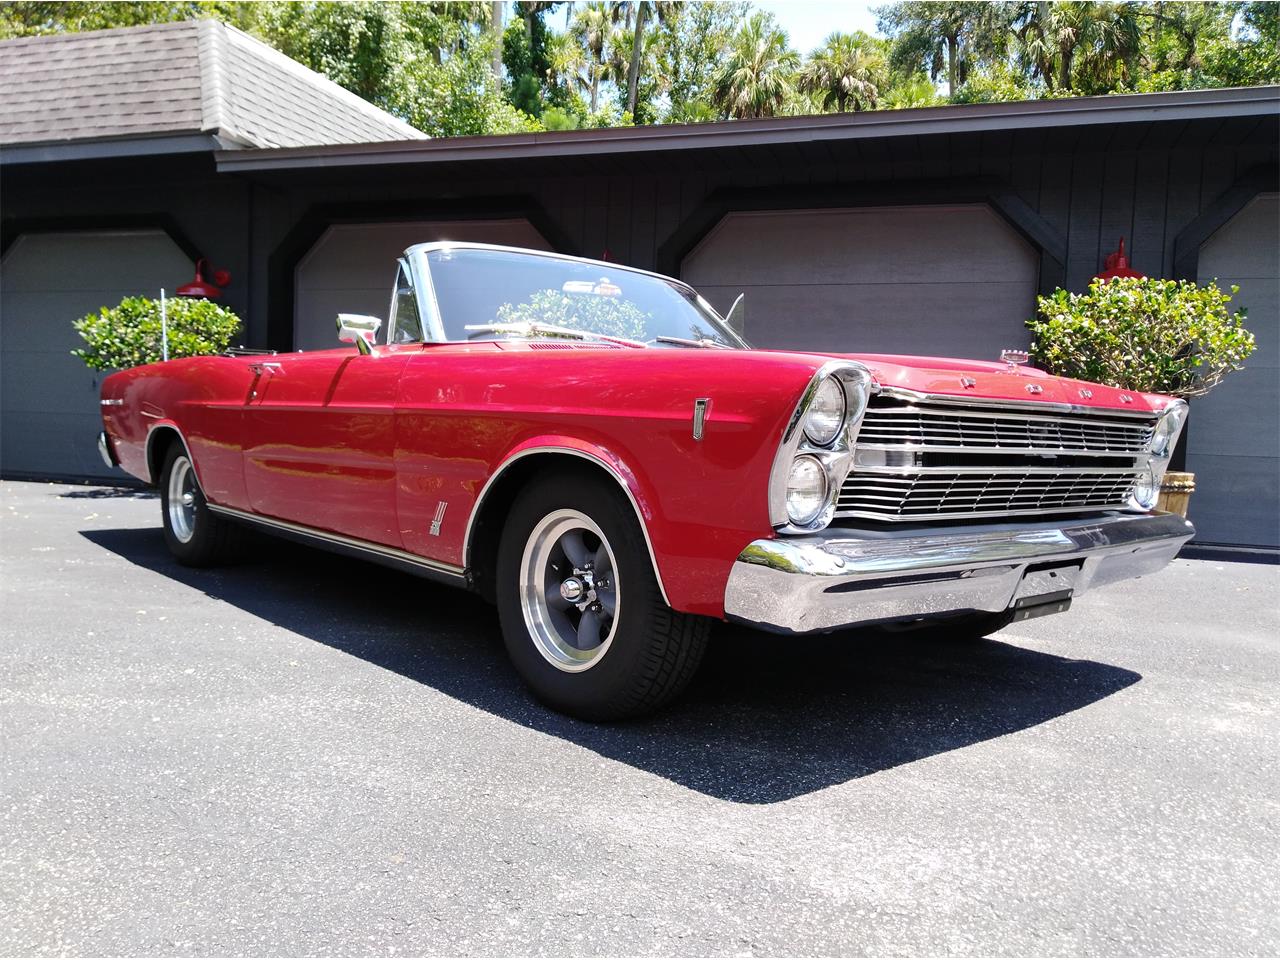 1966 Ford Galaxie 500 For Sale Classiccars Com Cc 1137112